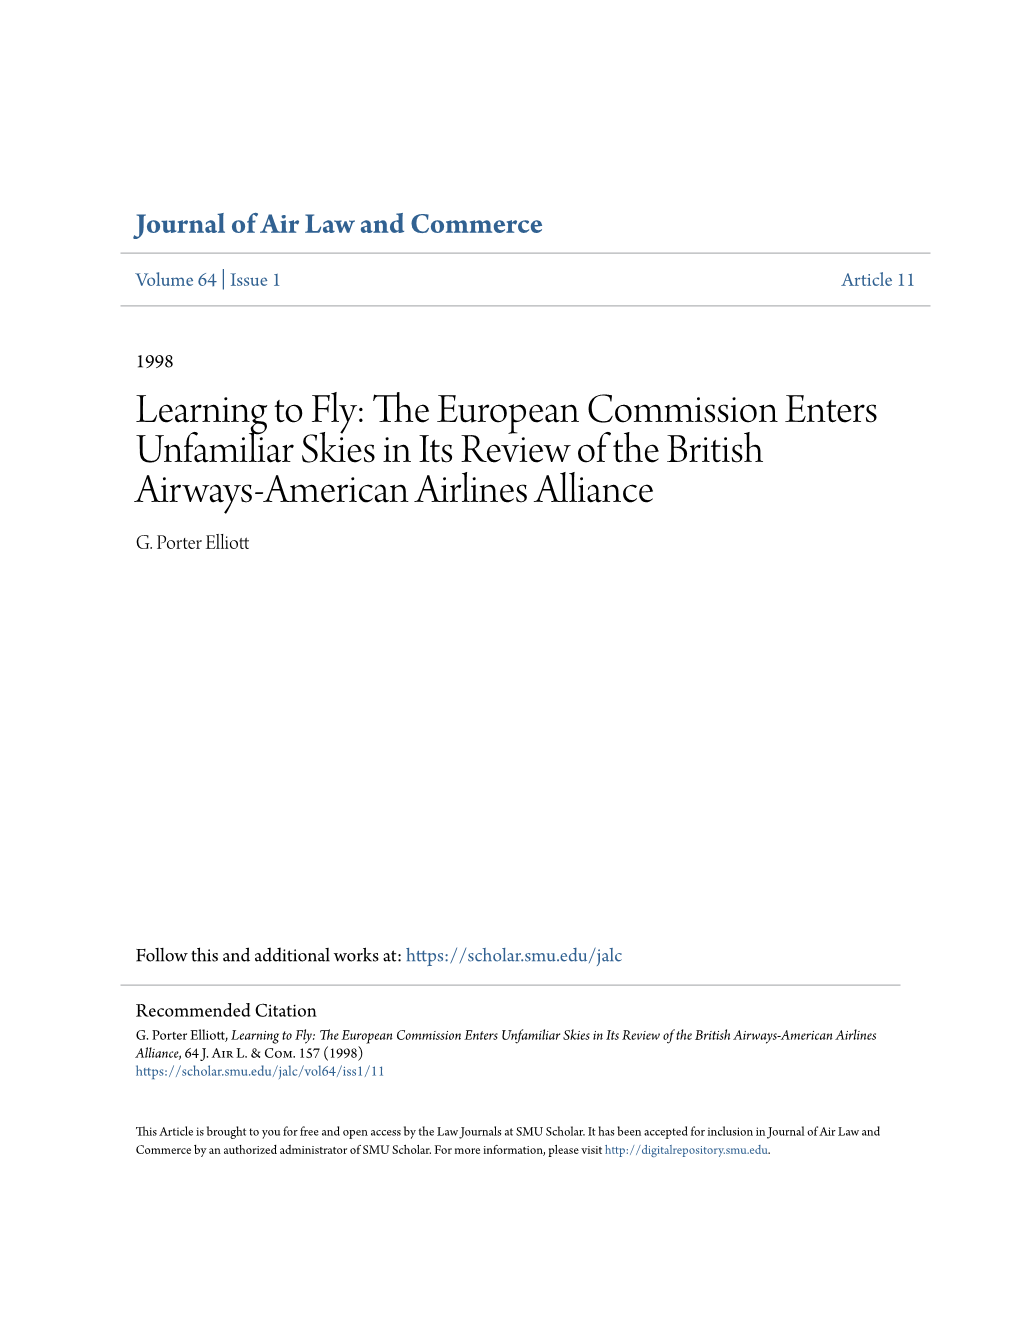 The European Commission Enters Unfamiliar Skies in Its Review of the British Airways-American Airlines Alliance, 64 J